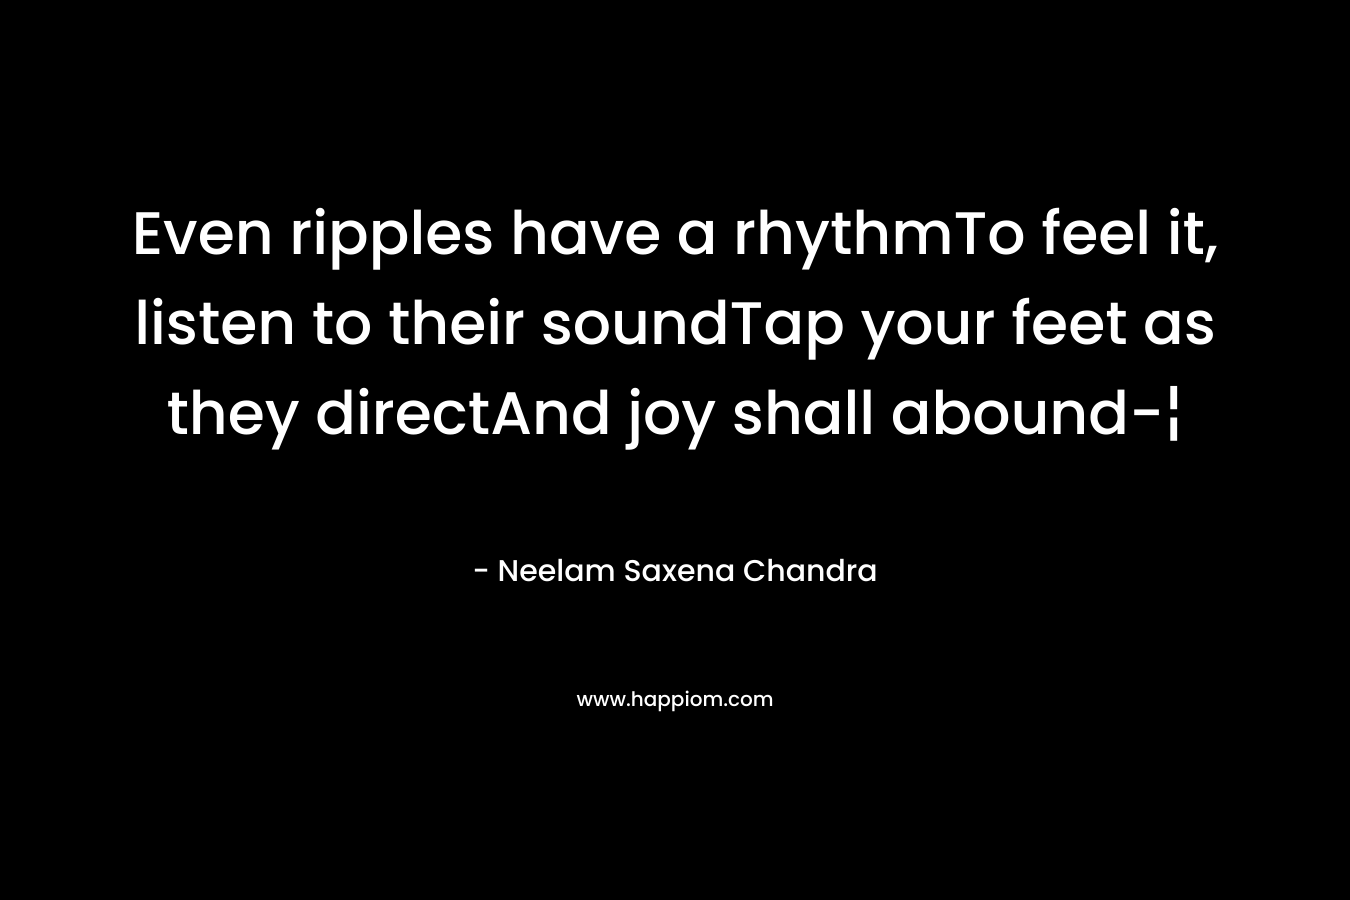 Even ripples have a rhythmTo feel it, listen to their soundTap your feet as they directAnd joy shall abound-¦